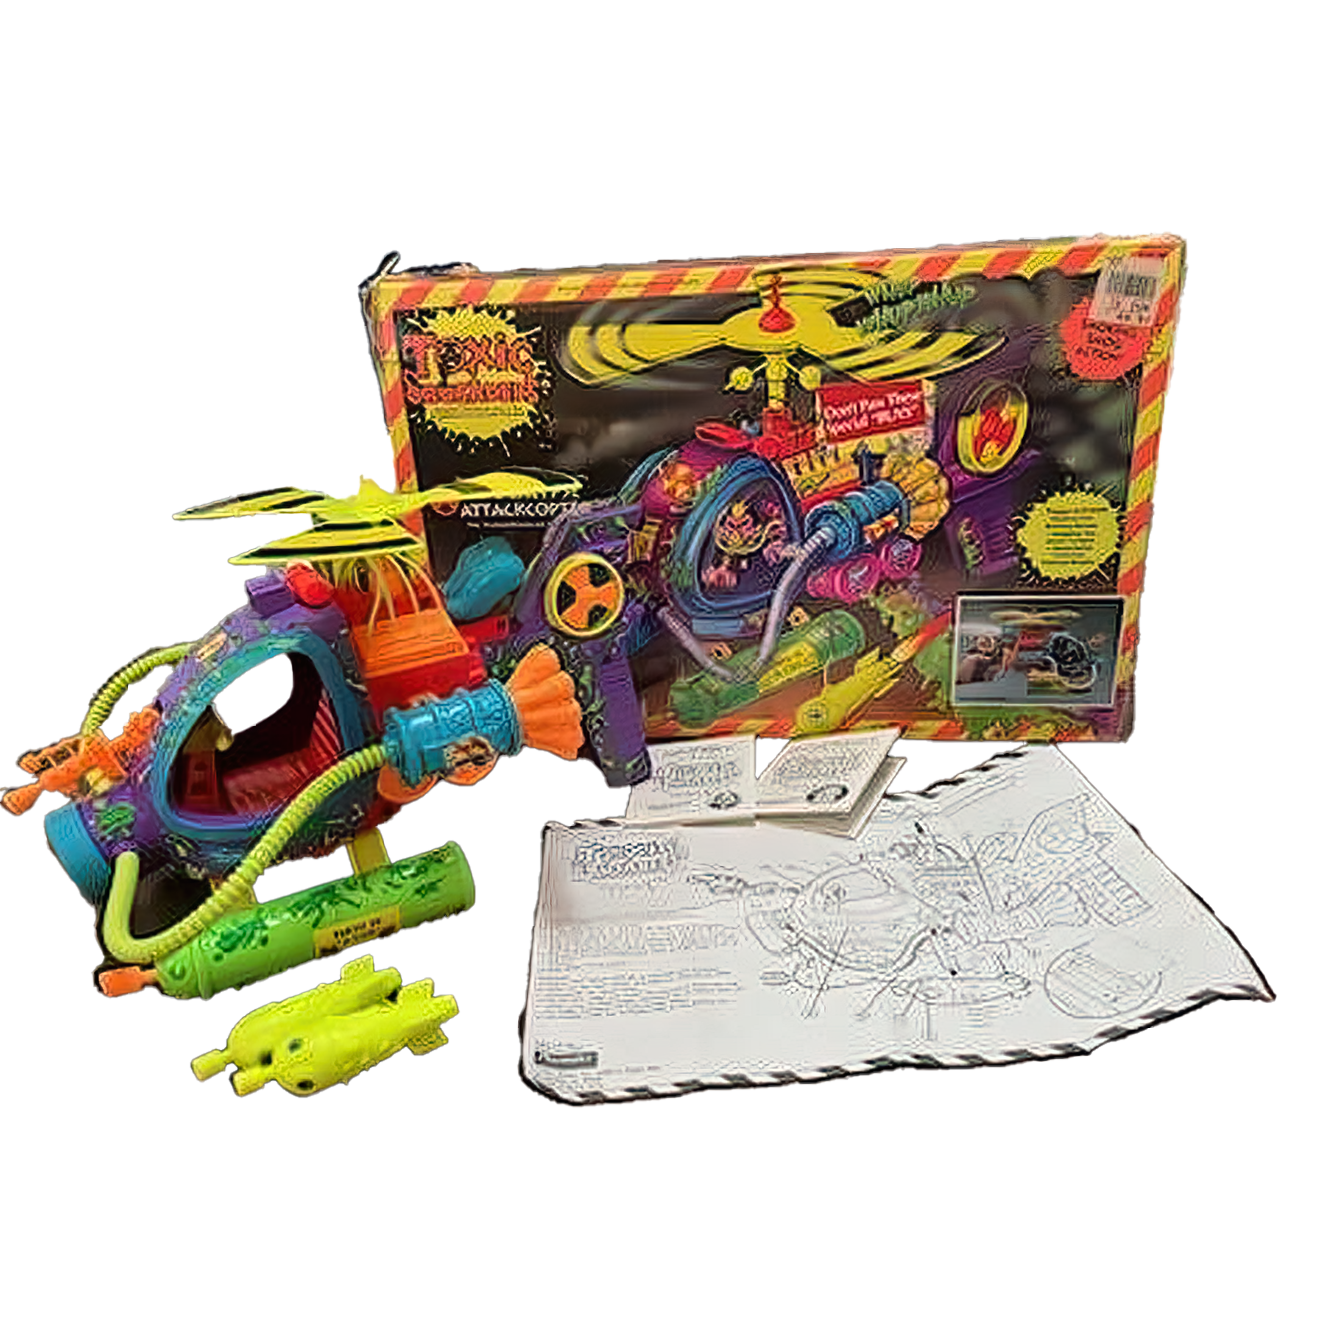 1991 Playmates Toxic Crusaders Boxed Vehicle - Apocalypse Attackcopter